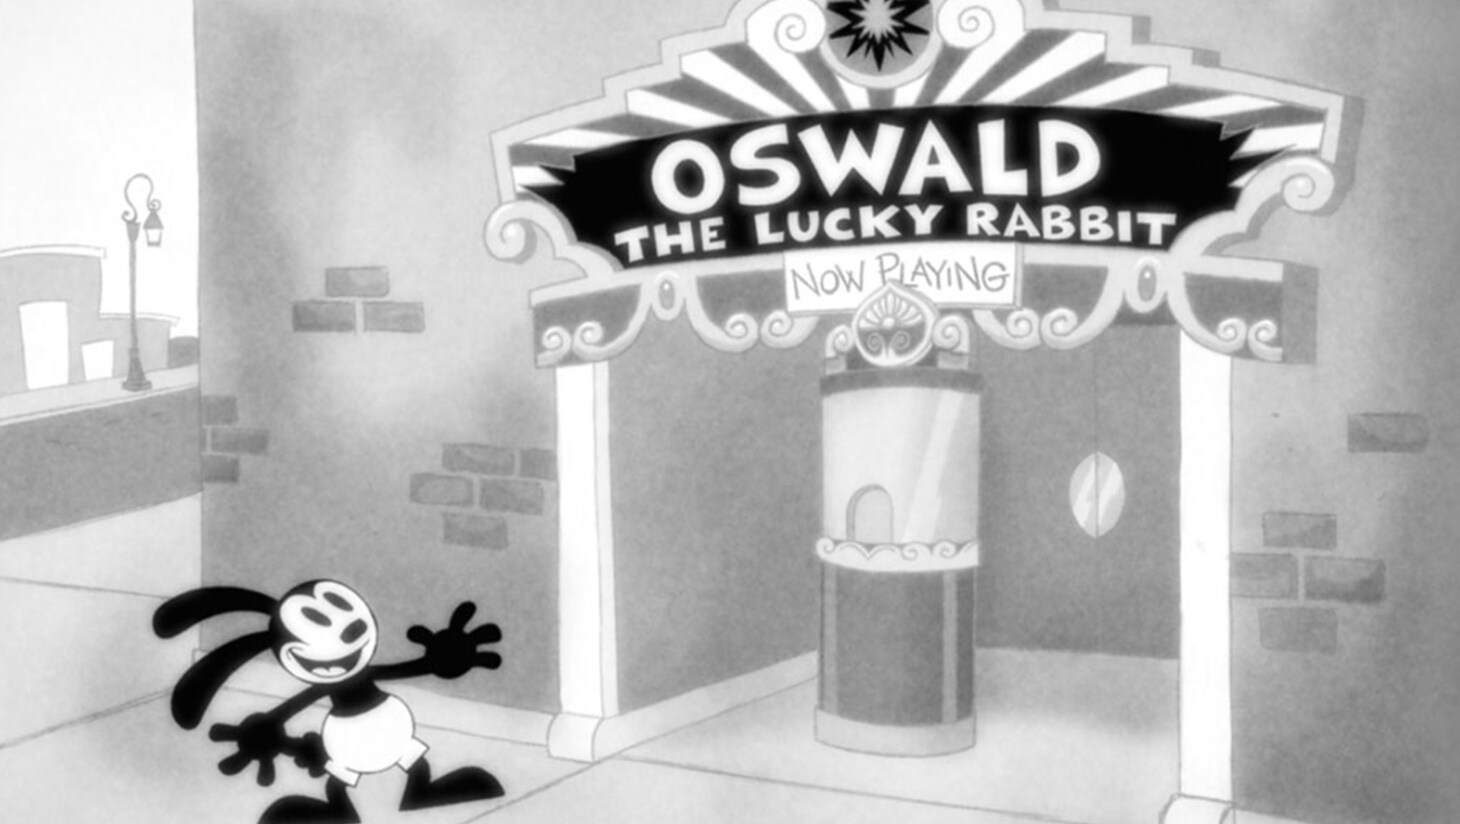 Black and white image of Oswald outside a theater with a marquee that says Oswald The Lucky Rabbit